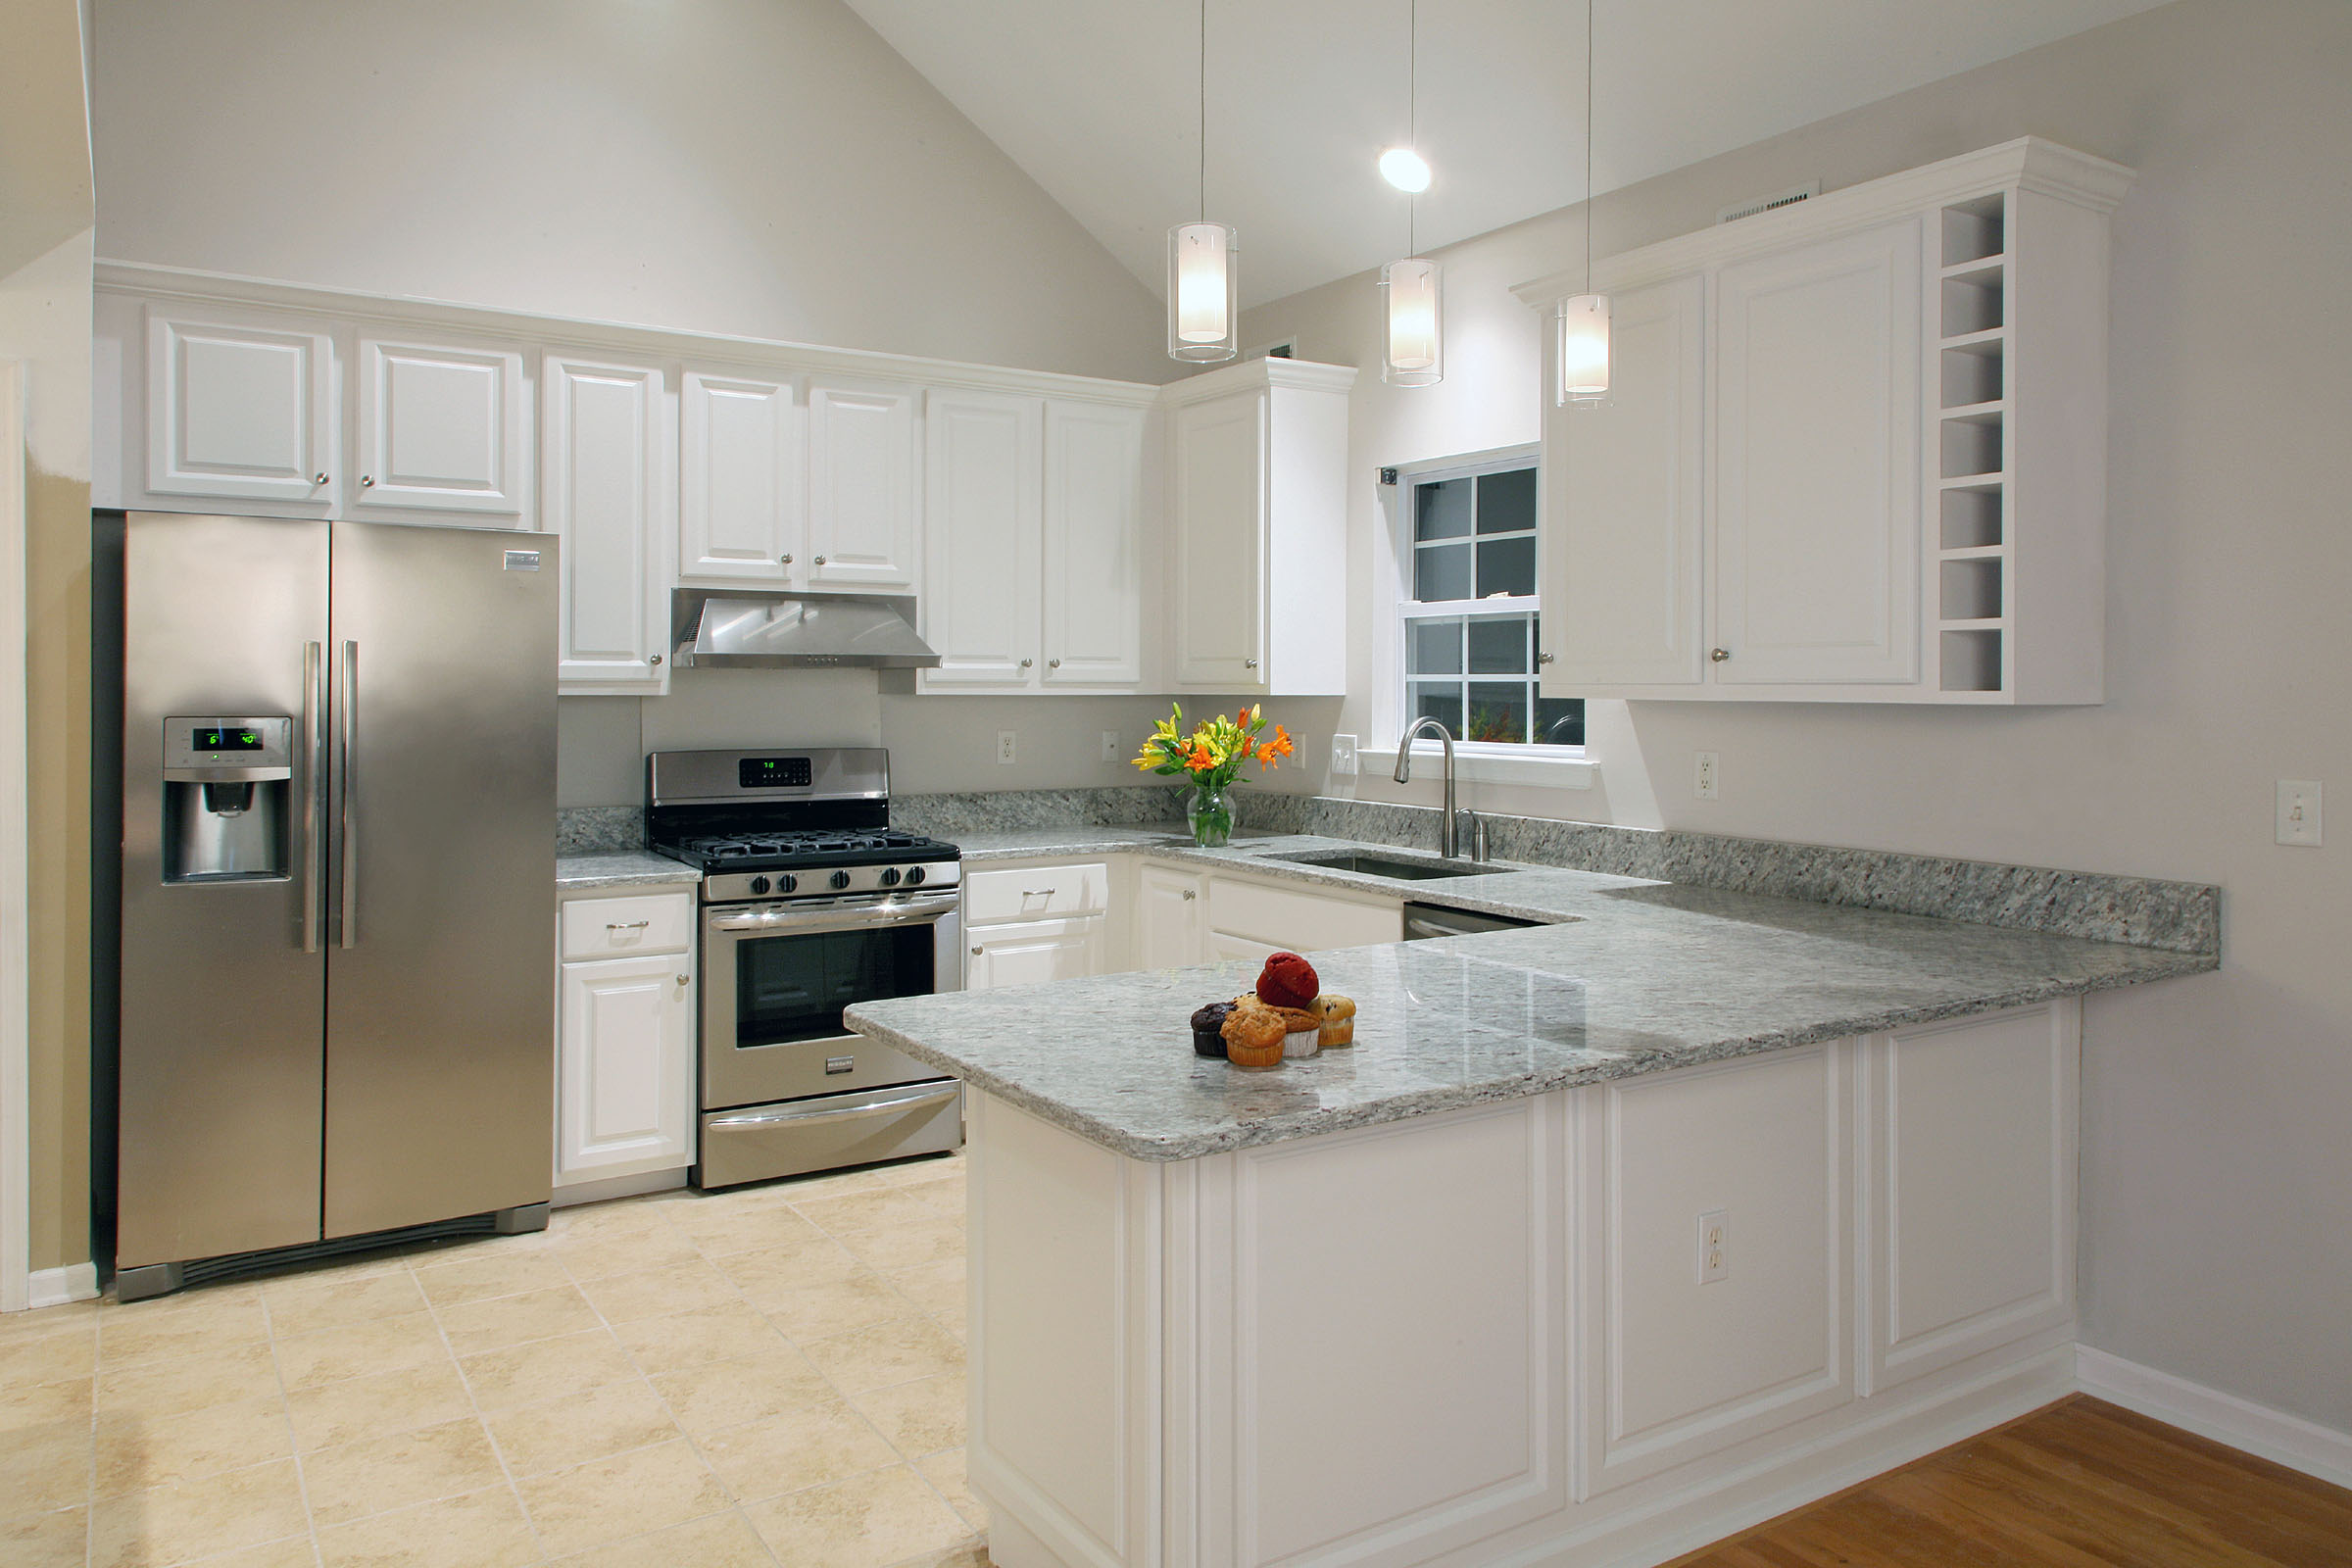 Reface And Increase Cabinet Size, How To Heighten Kitchen Cabinets